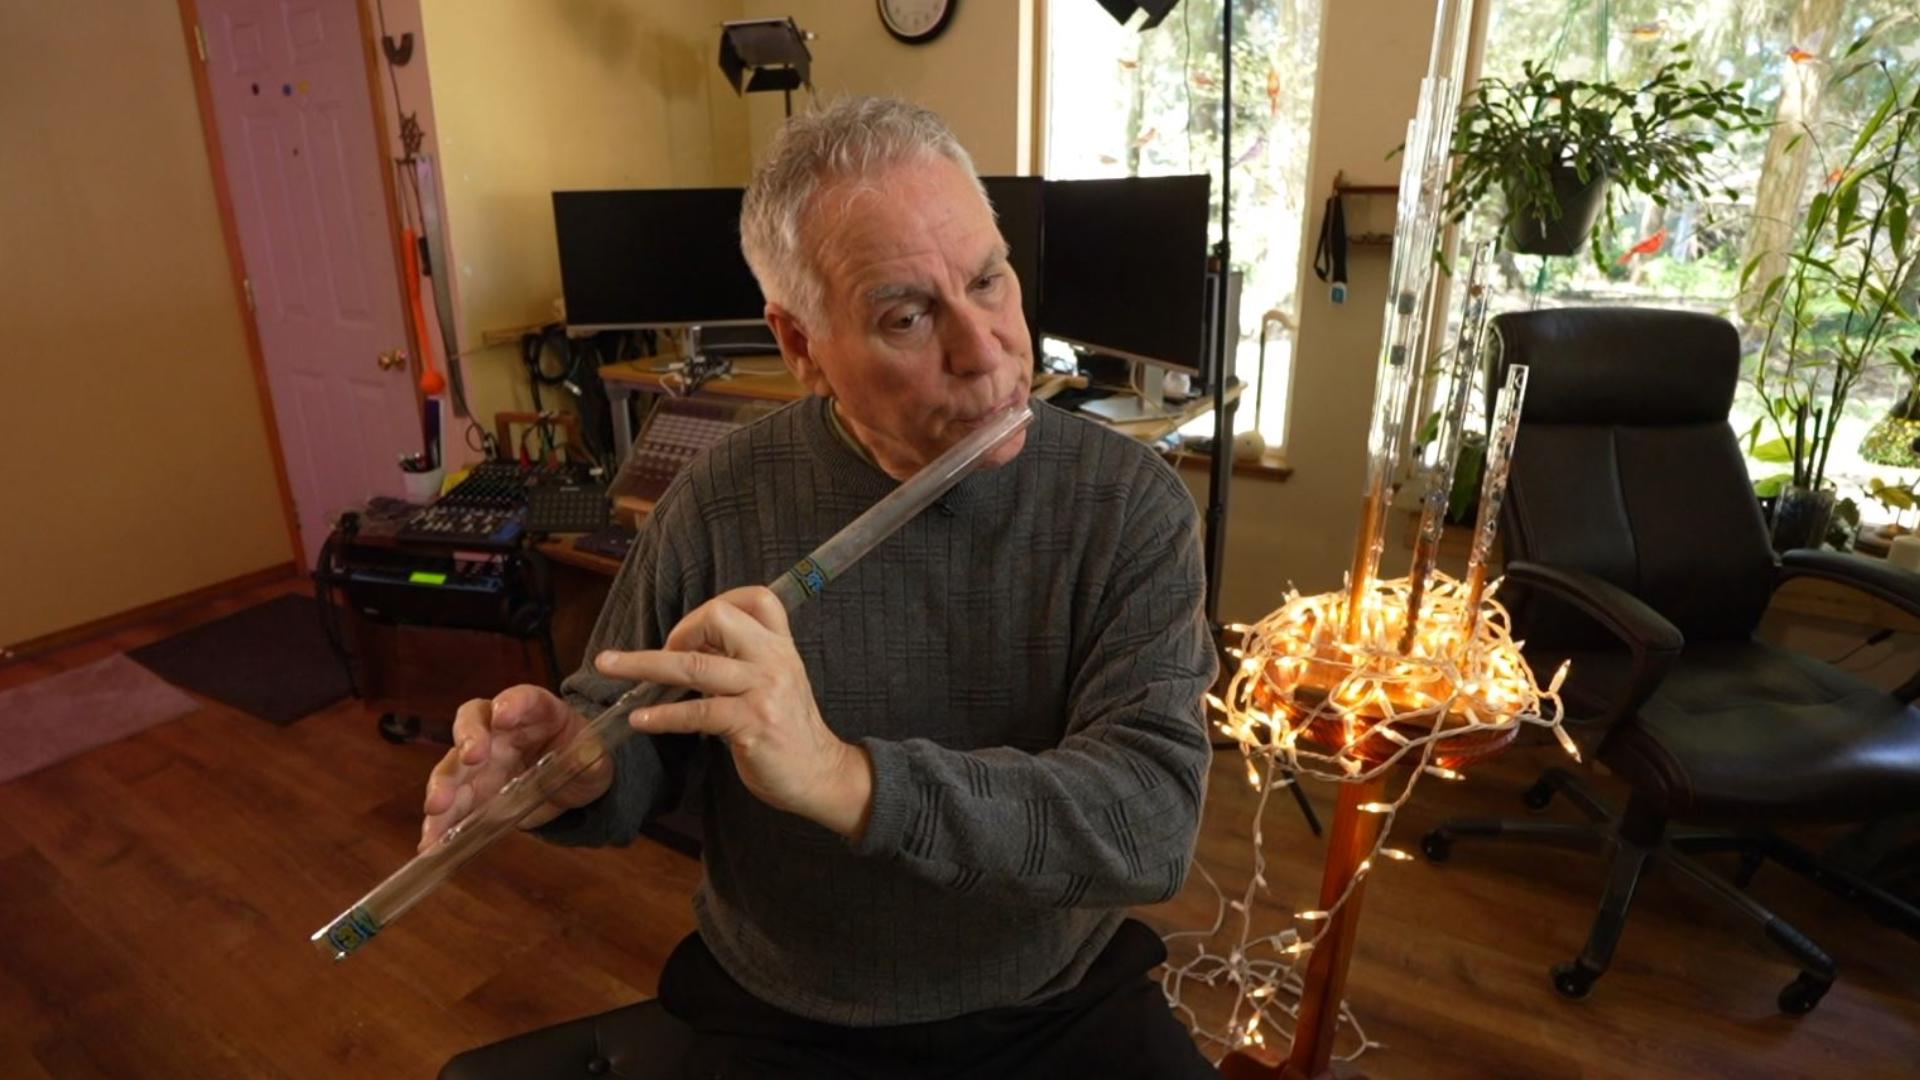 Jim Hall started making crystal flutes as a college student in 1974 #k5evening